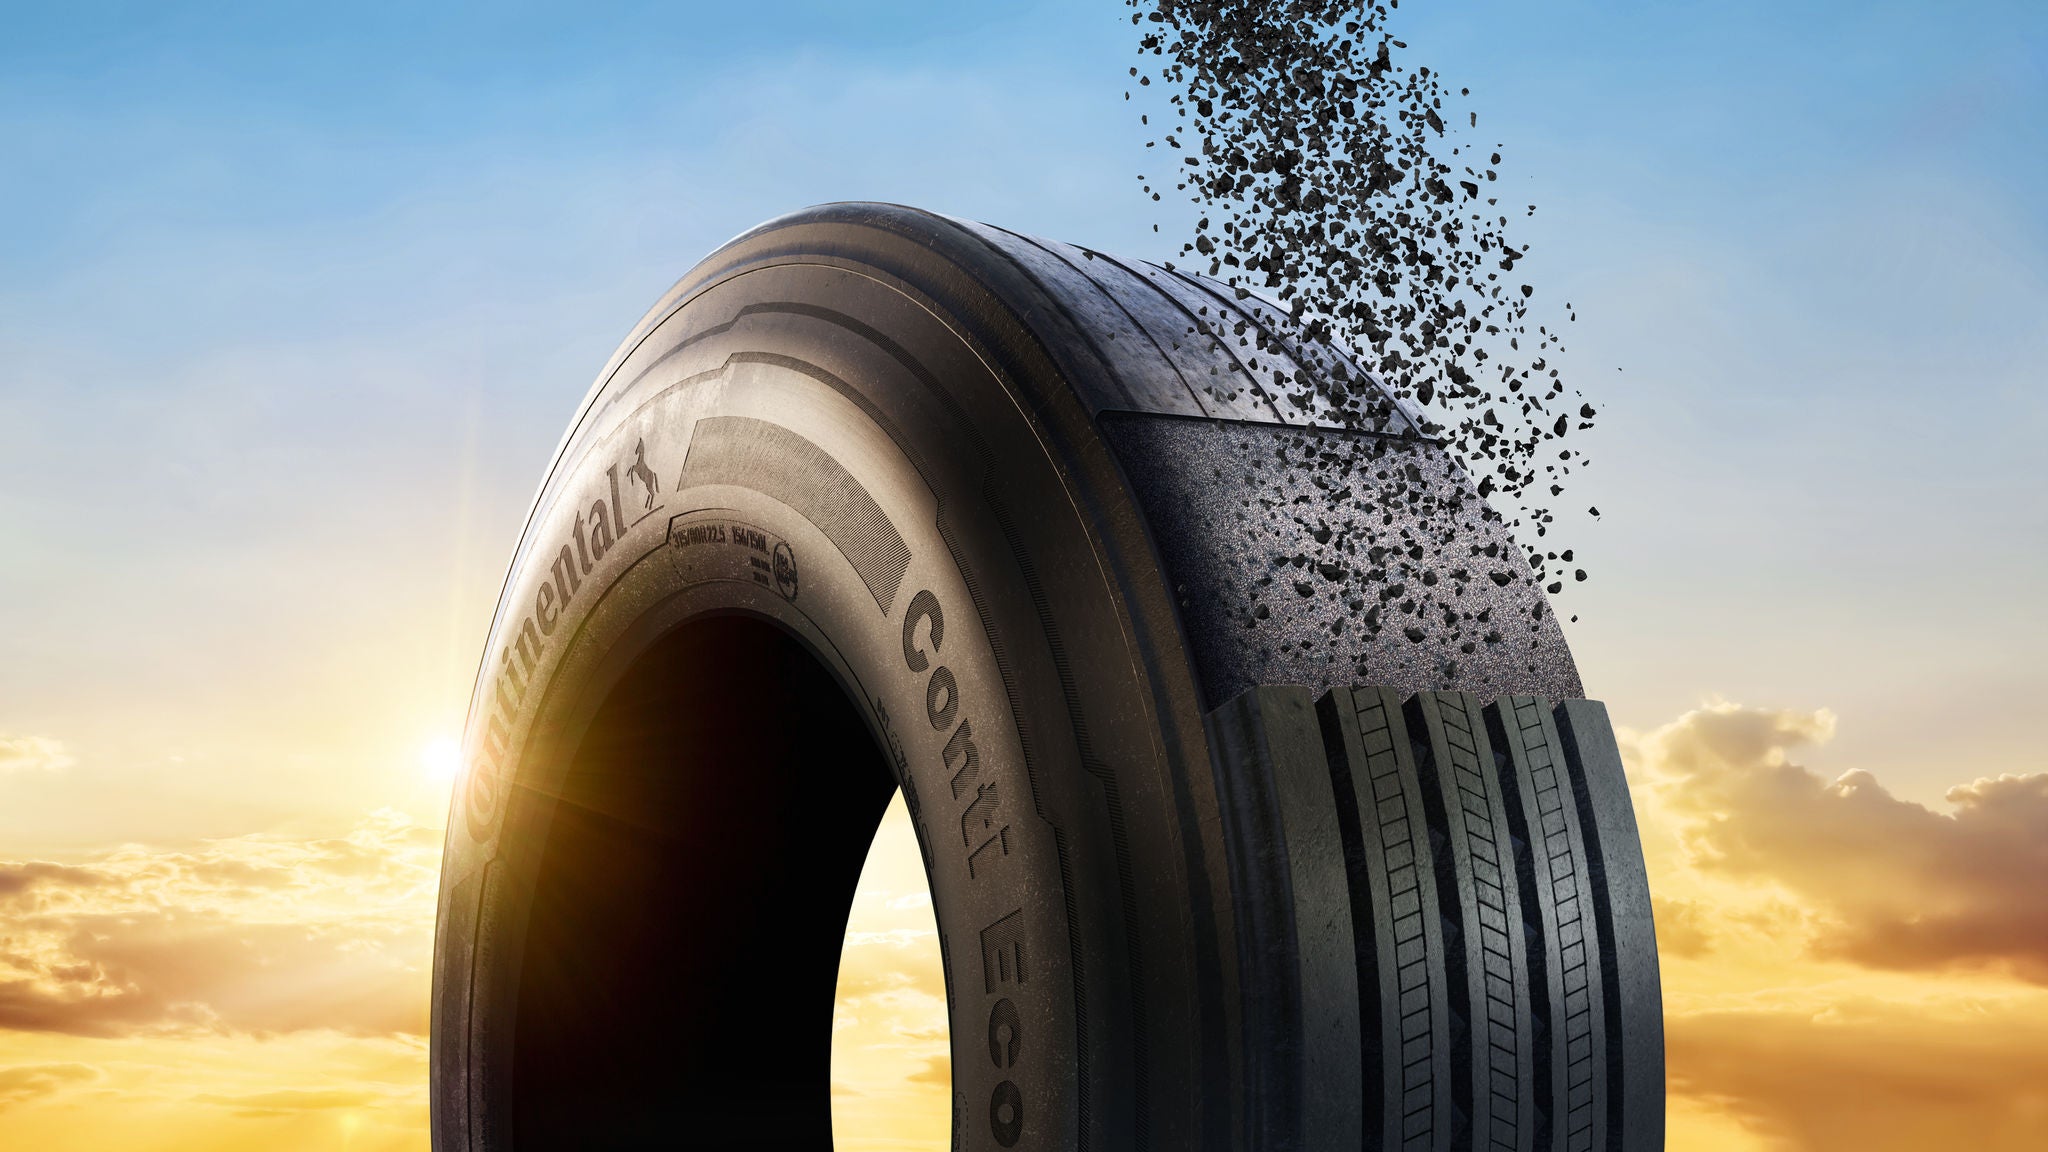  A tire that dissolves into components